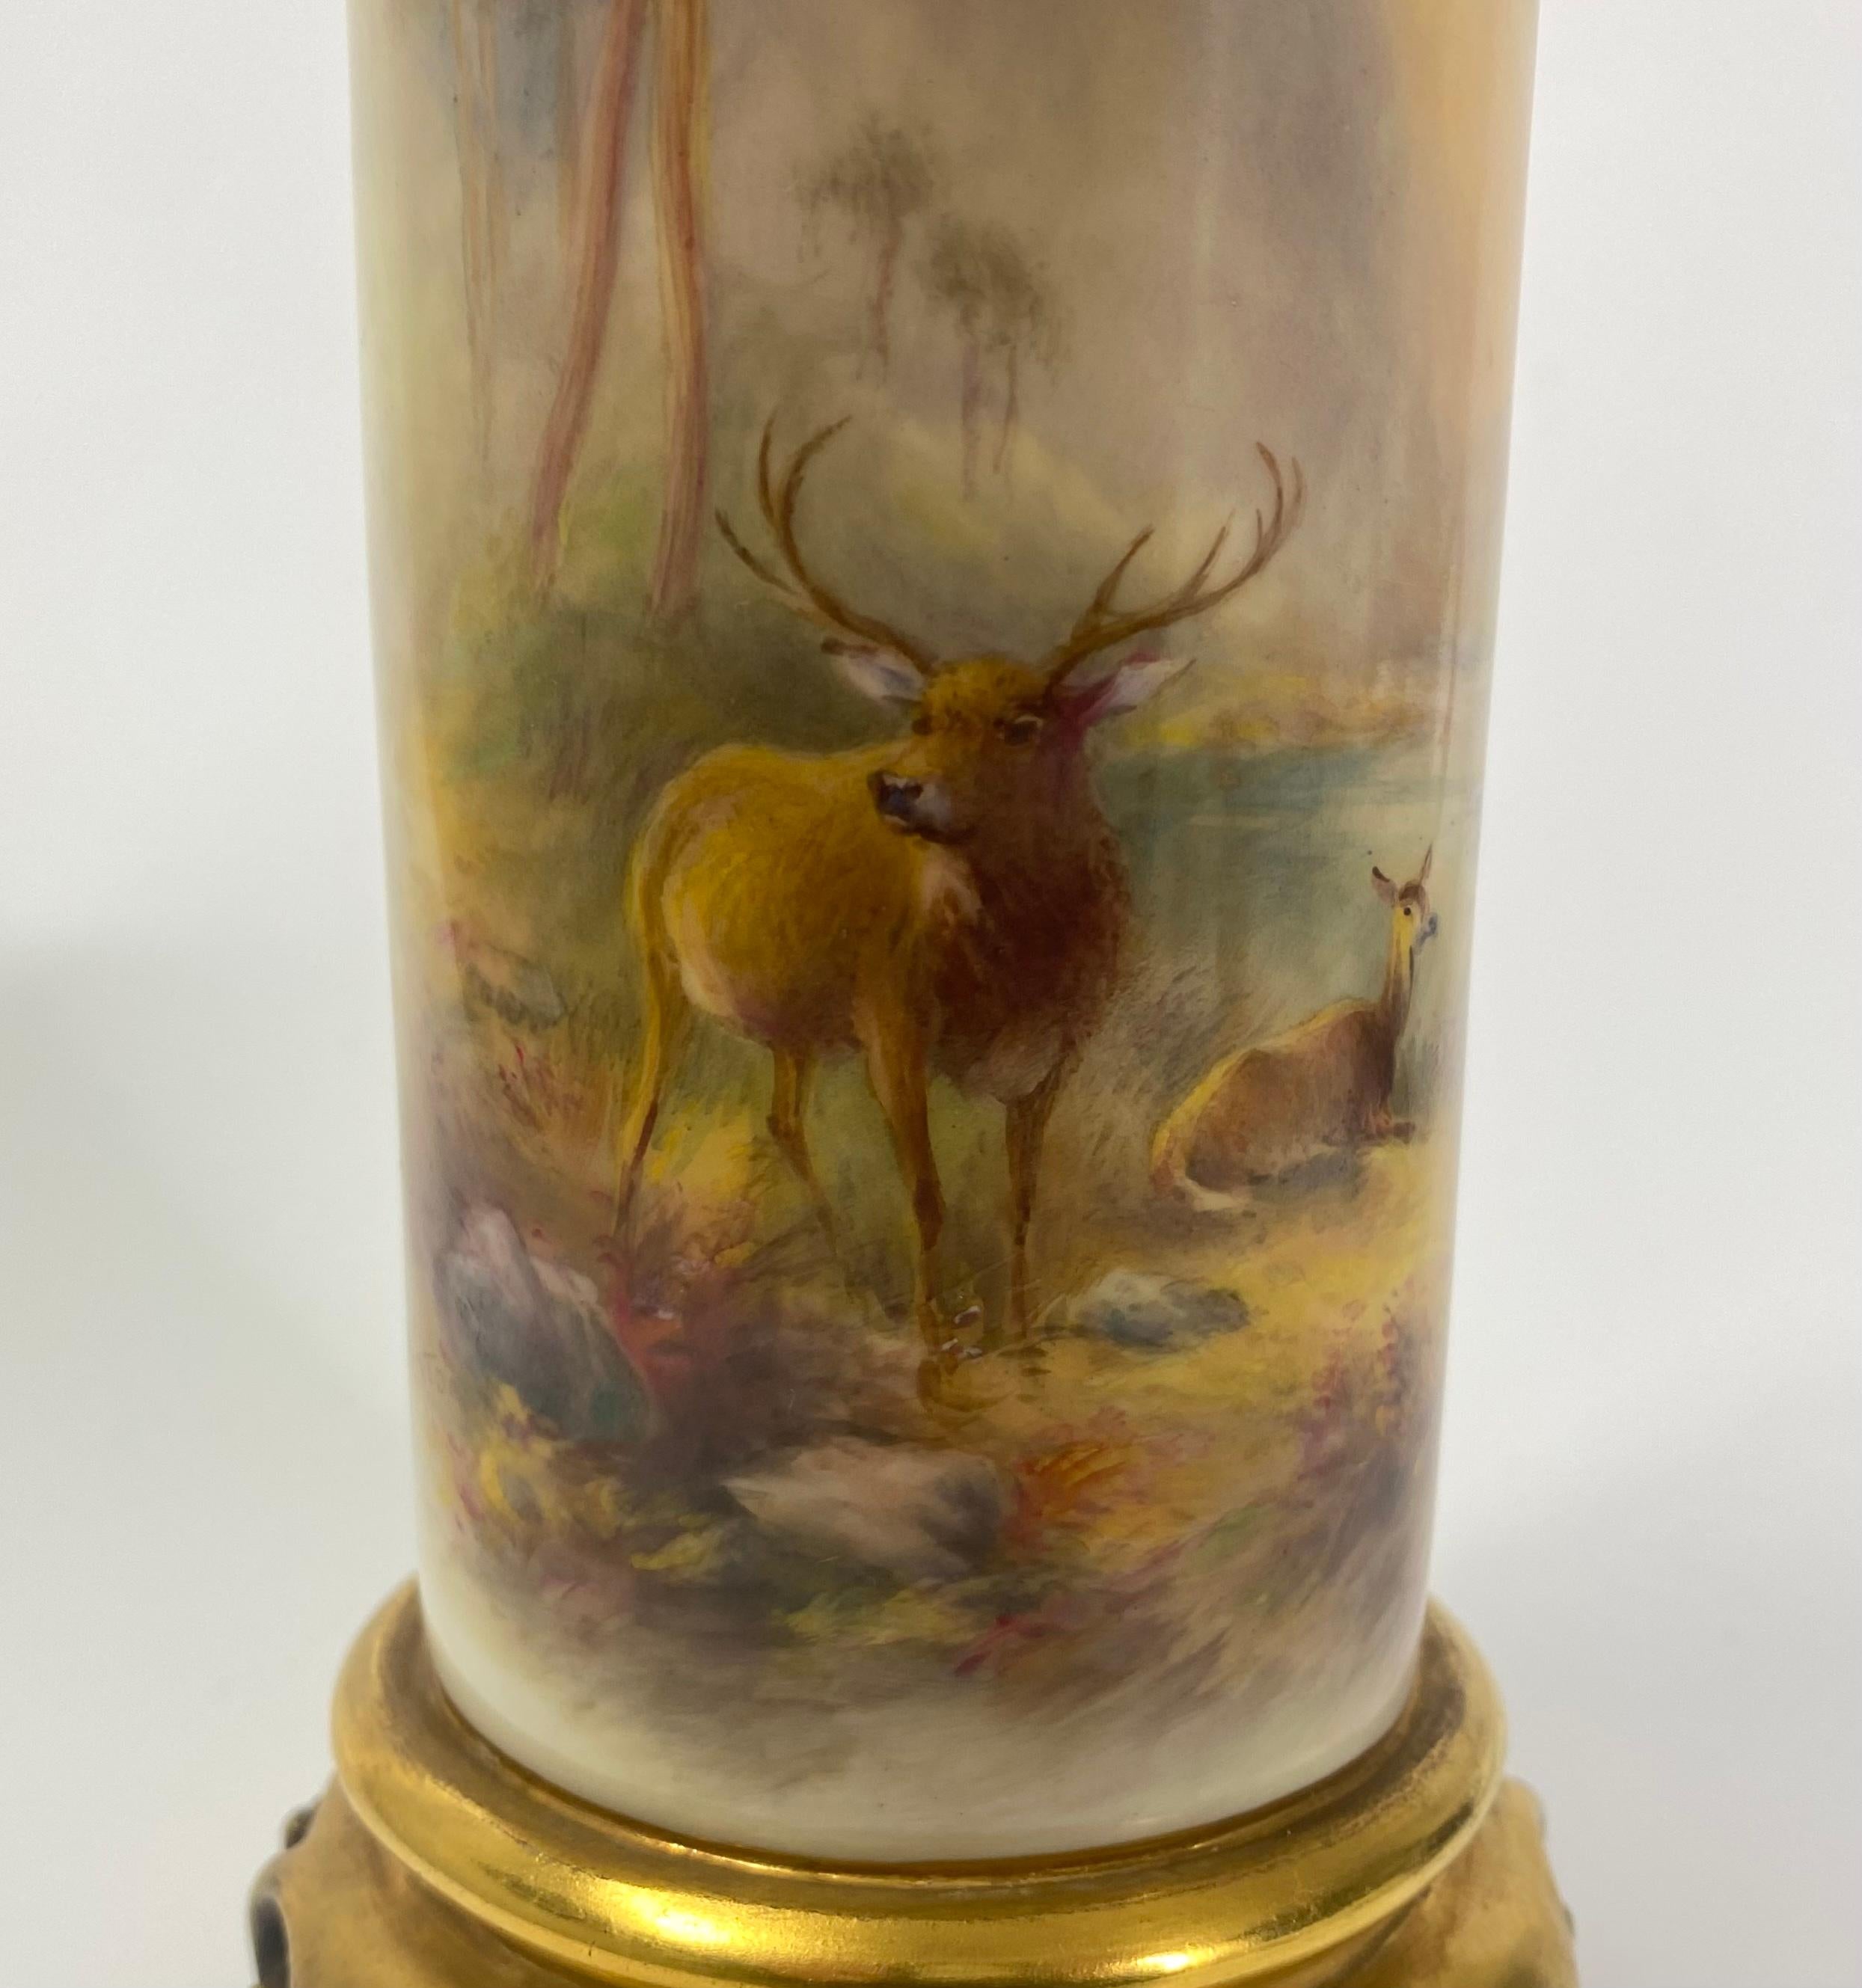 Rare Royal Worcester porcelain ‘Stag’ vase, painted by Harry Stinton, dated 1934. The cylindrical vase, set upon a gilded scroll footrim, and finely painted with a large stag, and a deer in an atmospheric Highland setting of trees, and a loch, in a